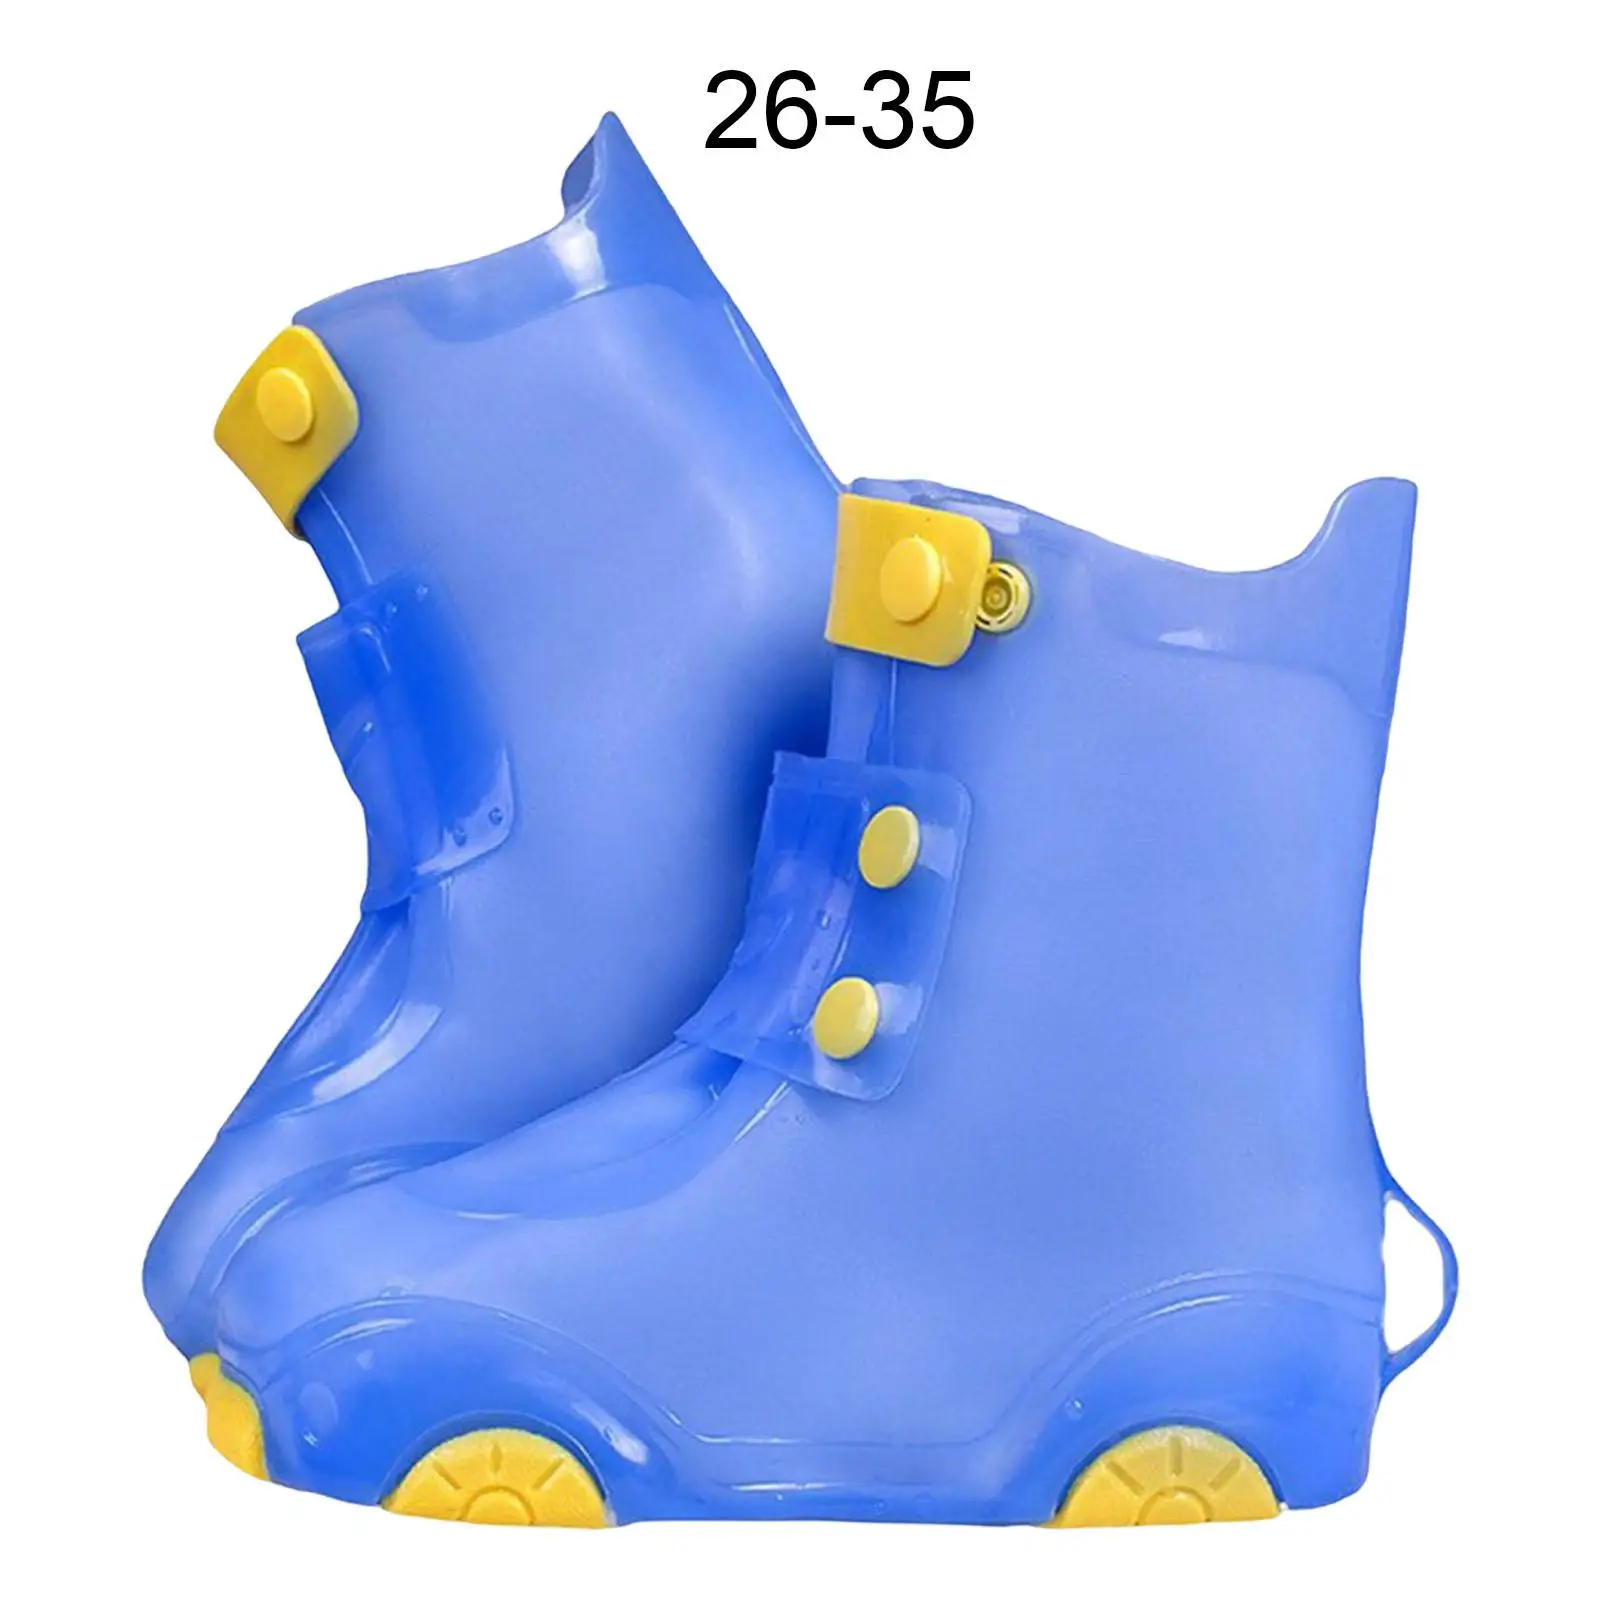 Kids Rain Shoe Covers Overshoes Protectors Protection Rain Galoshes Foldable Waterproof Wear Resistant for Kids Camping Children